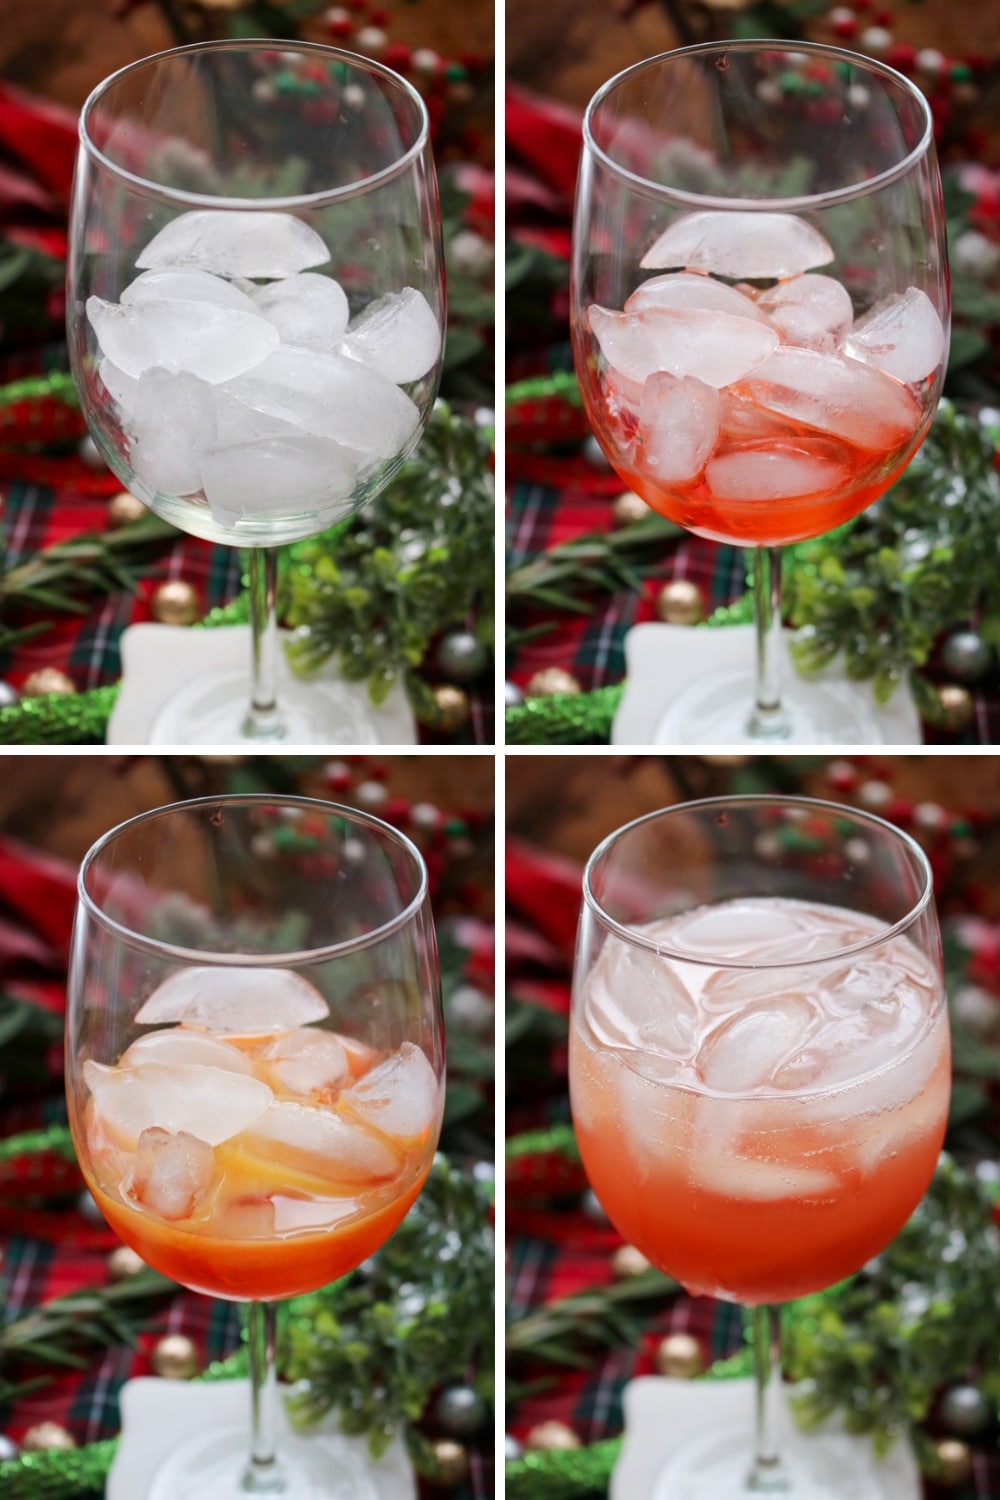 Four photos showing how to make a winter aperol spritz